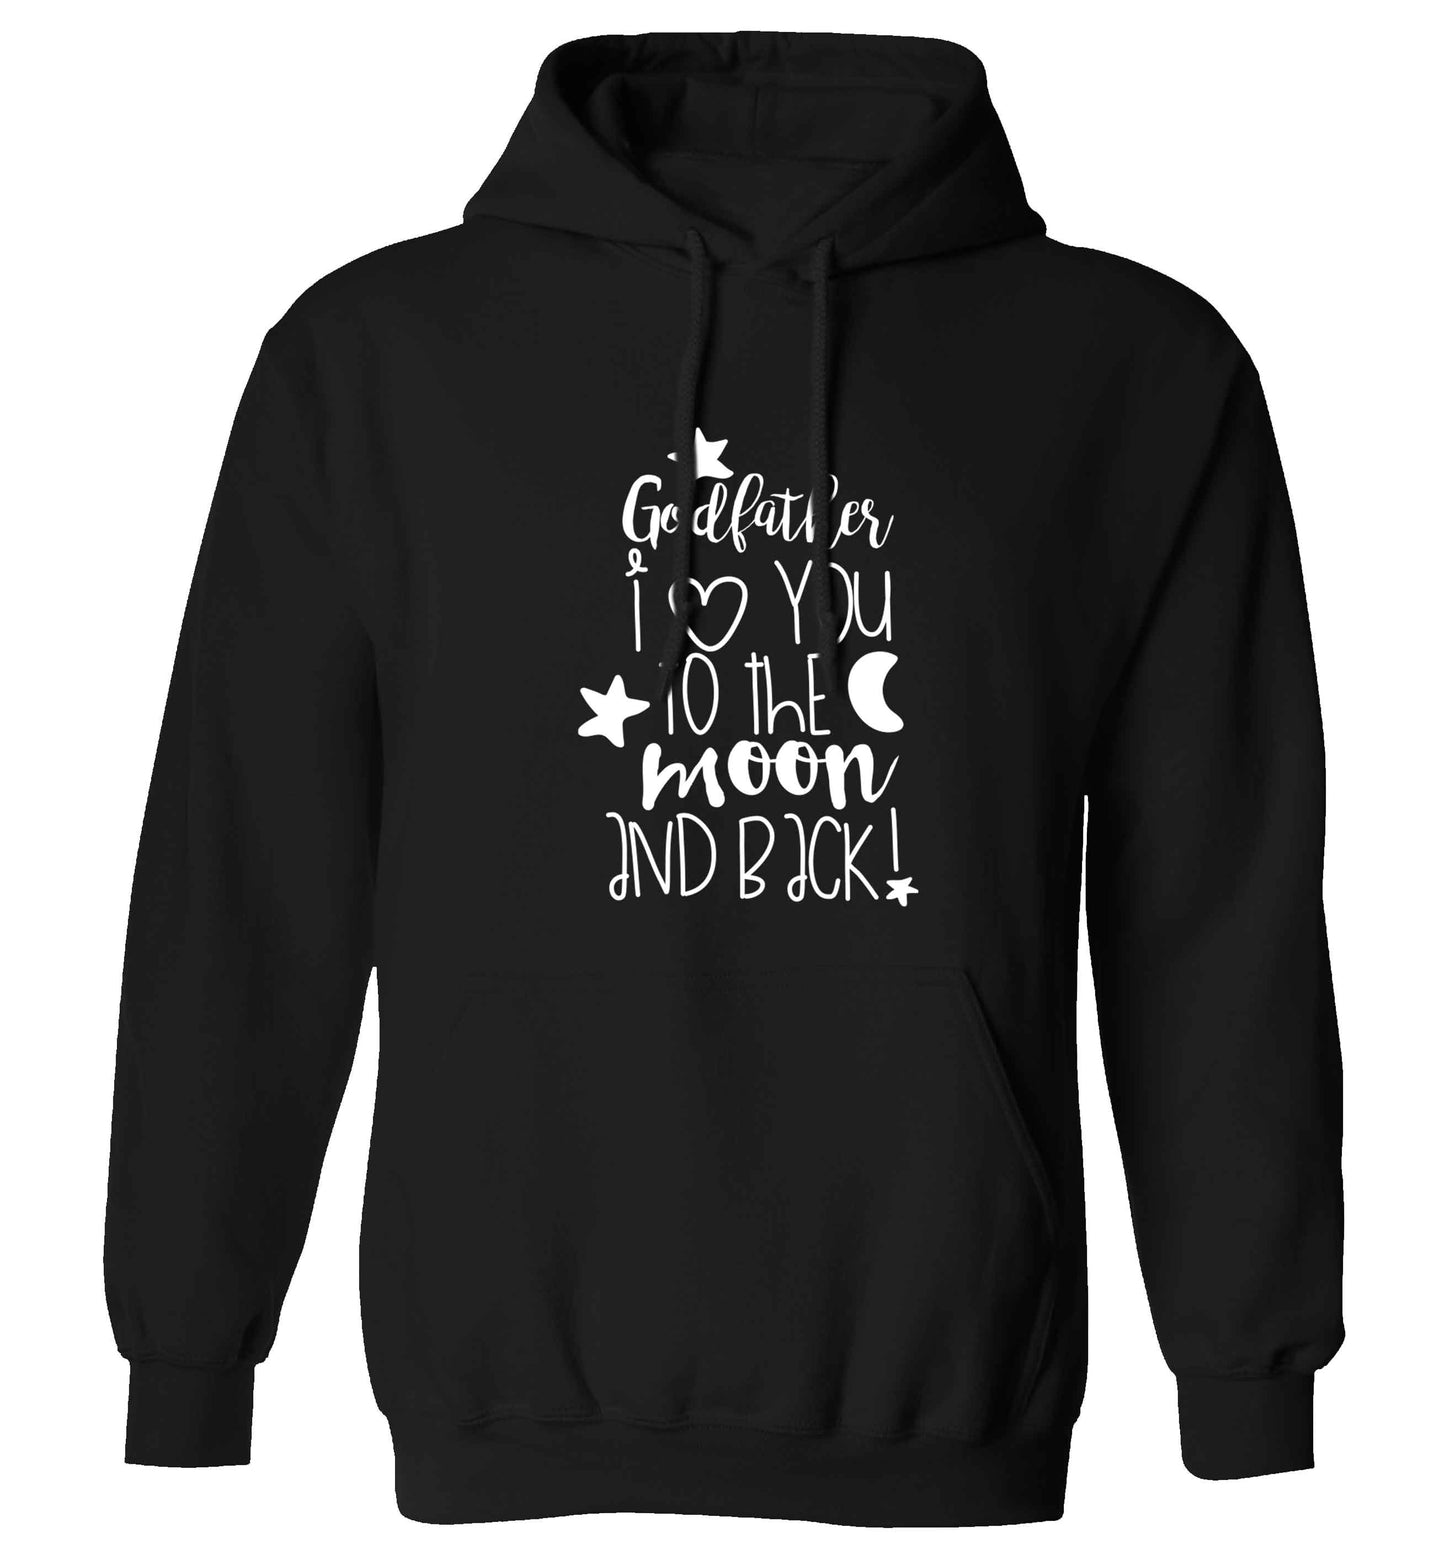 Godfather I love you to the moon and back adults unisex black hoodie 2XL